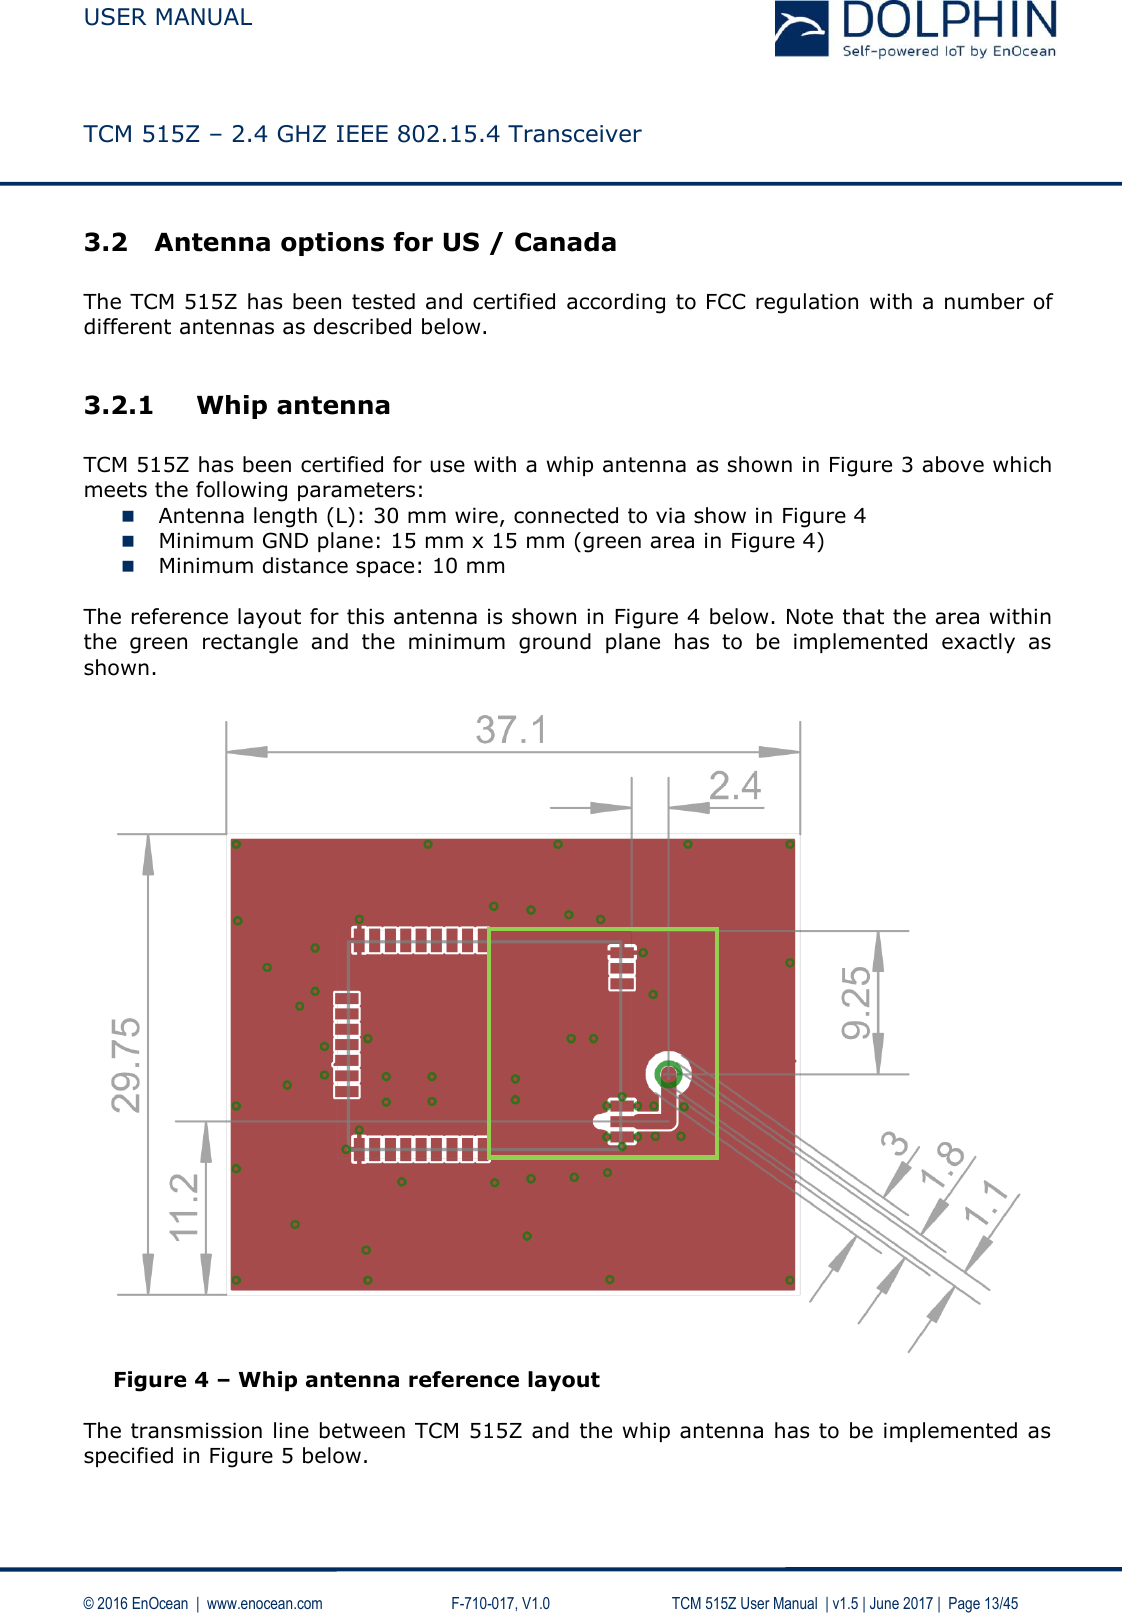  USER MANUAL    TCM 515Z – 2.4 GHZ IEEE 802.15.4 Transceiver   © 2016 EnOcean  |  www.enocean.com     F-710-017, V1.0        TCM 515Z User Manual  | v1.5 | June 2017 |  Page 13/45 3.2 Antenna options for US / Canada  The TCM 515Z has been tested and certified according to FCC regulation with a number of different antennas as described below.  3.2.1 Whip antenna  TCM 515Z has been certified for use with a whip antenna as shown in Figure 3 above which meets the following parameters:  Antenna length (L): 30 mm wire, connected to via show in Figure 4  Minimum GND plane: 15 mm x 15 mm (green area in Figure 4)  Minimum distance space: 10 mm  The reference layout for this antenna is shown in Figure 4 below. Note that the area within the  green  rectangle  and  the  minimum  ground  plane  has  to  be  implemented  exactly  as shown.   Figure 4 – Whip antenna reference layout  The transmission line between TCM 515Z and the whip antenna has to be implemented as specified in Figure 5 below.   